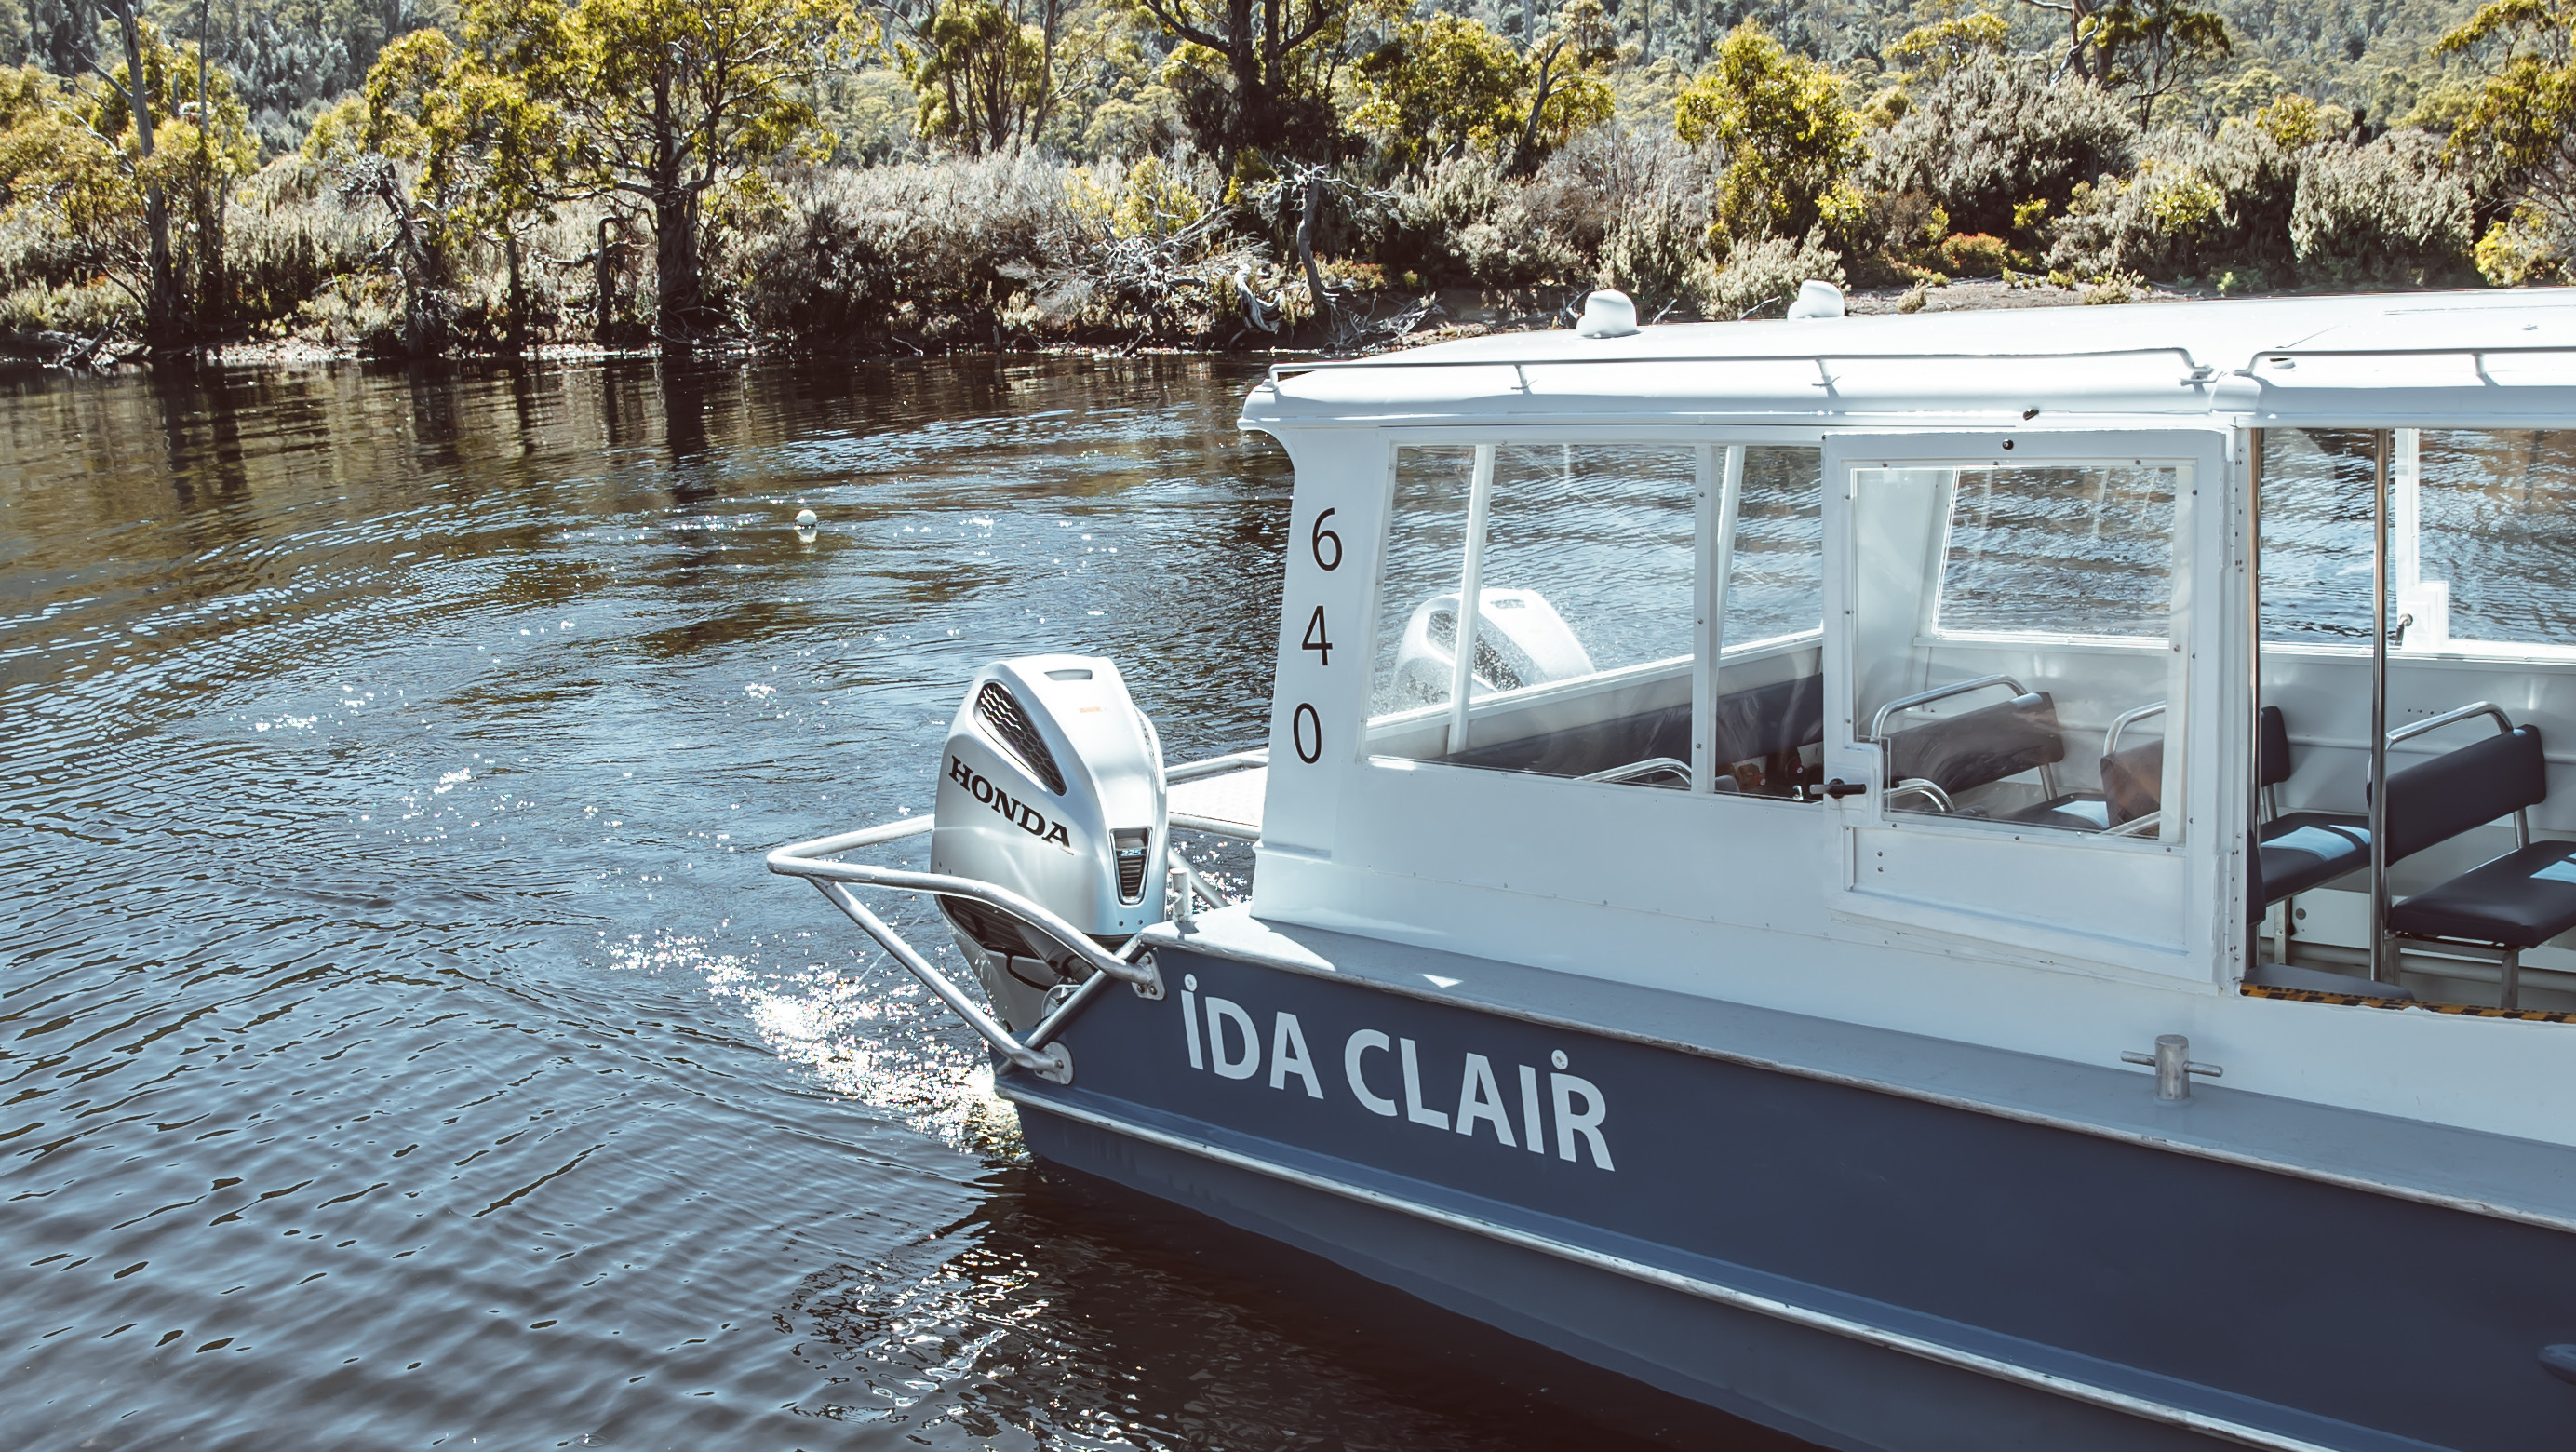 A navy and white boat, with IDA CLAIR, written on the side crosses the water at Lake St Clair National Park.